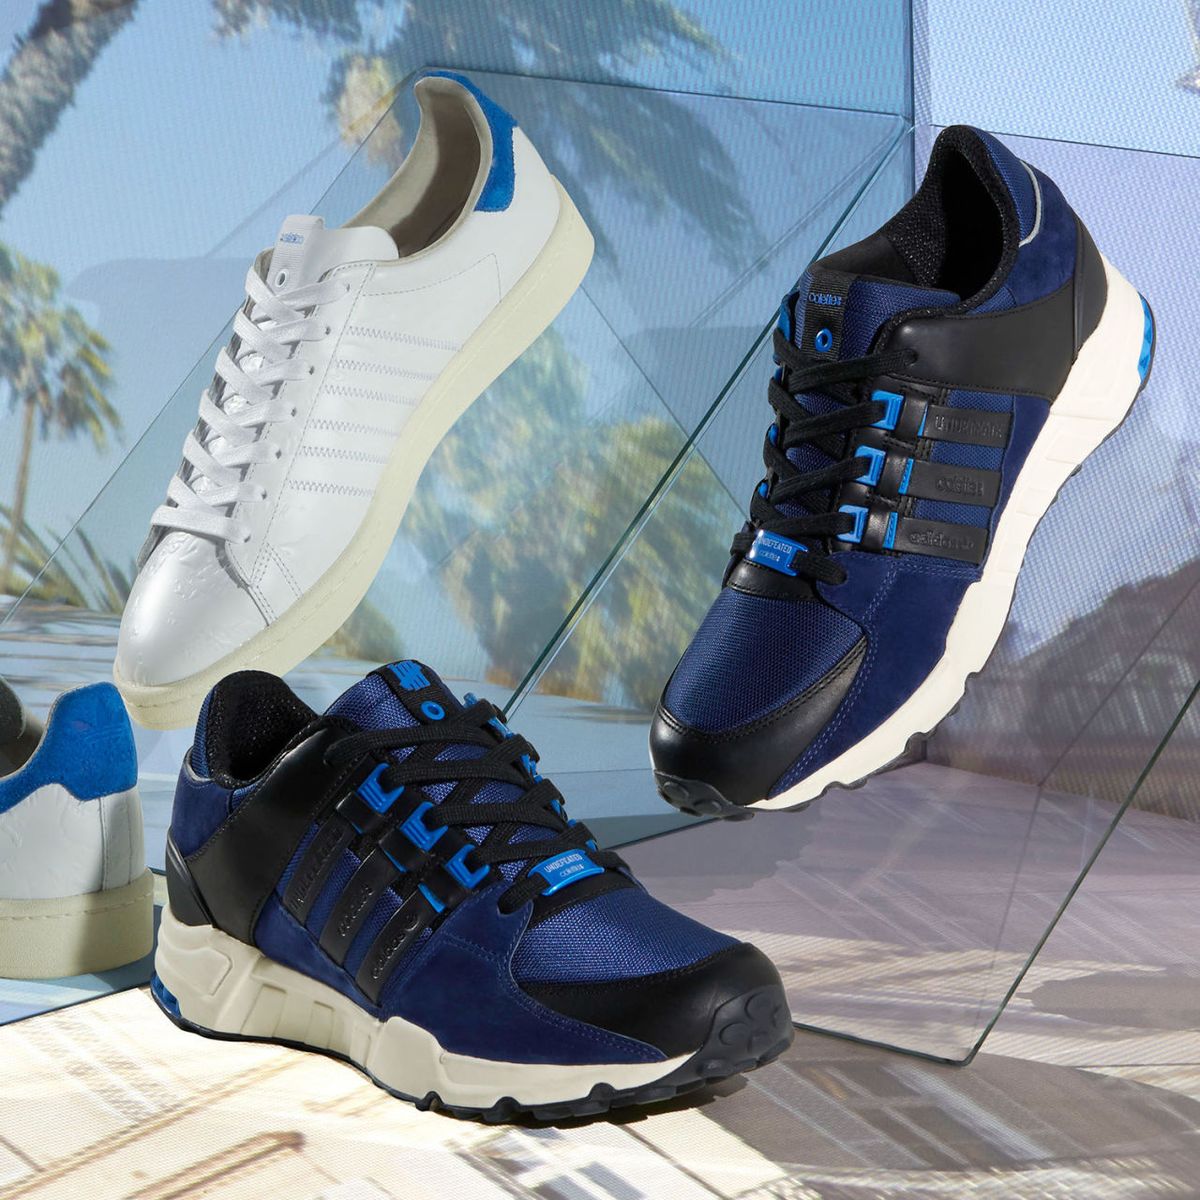 Consortium Colette x Undefeated - Where Buy the EQT Support and Campus 80